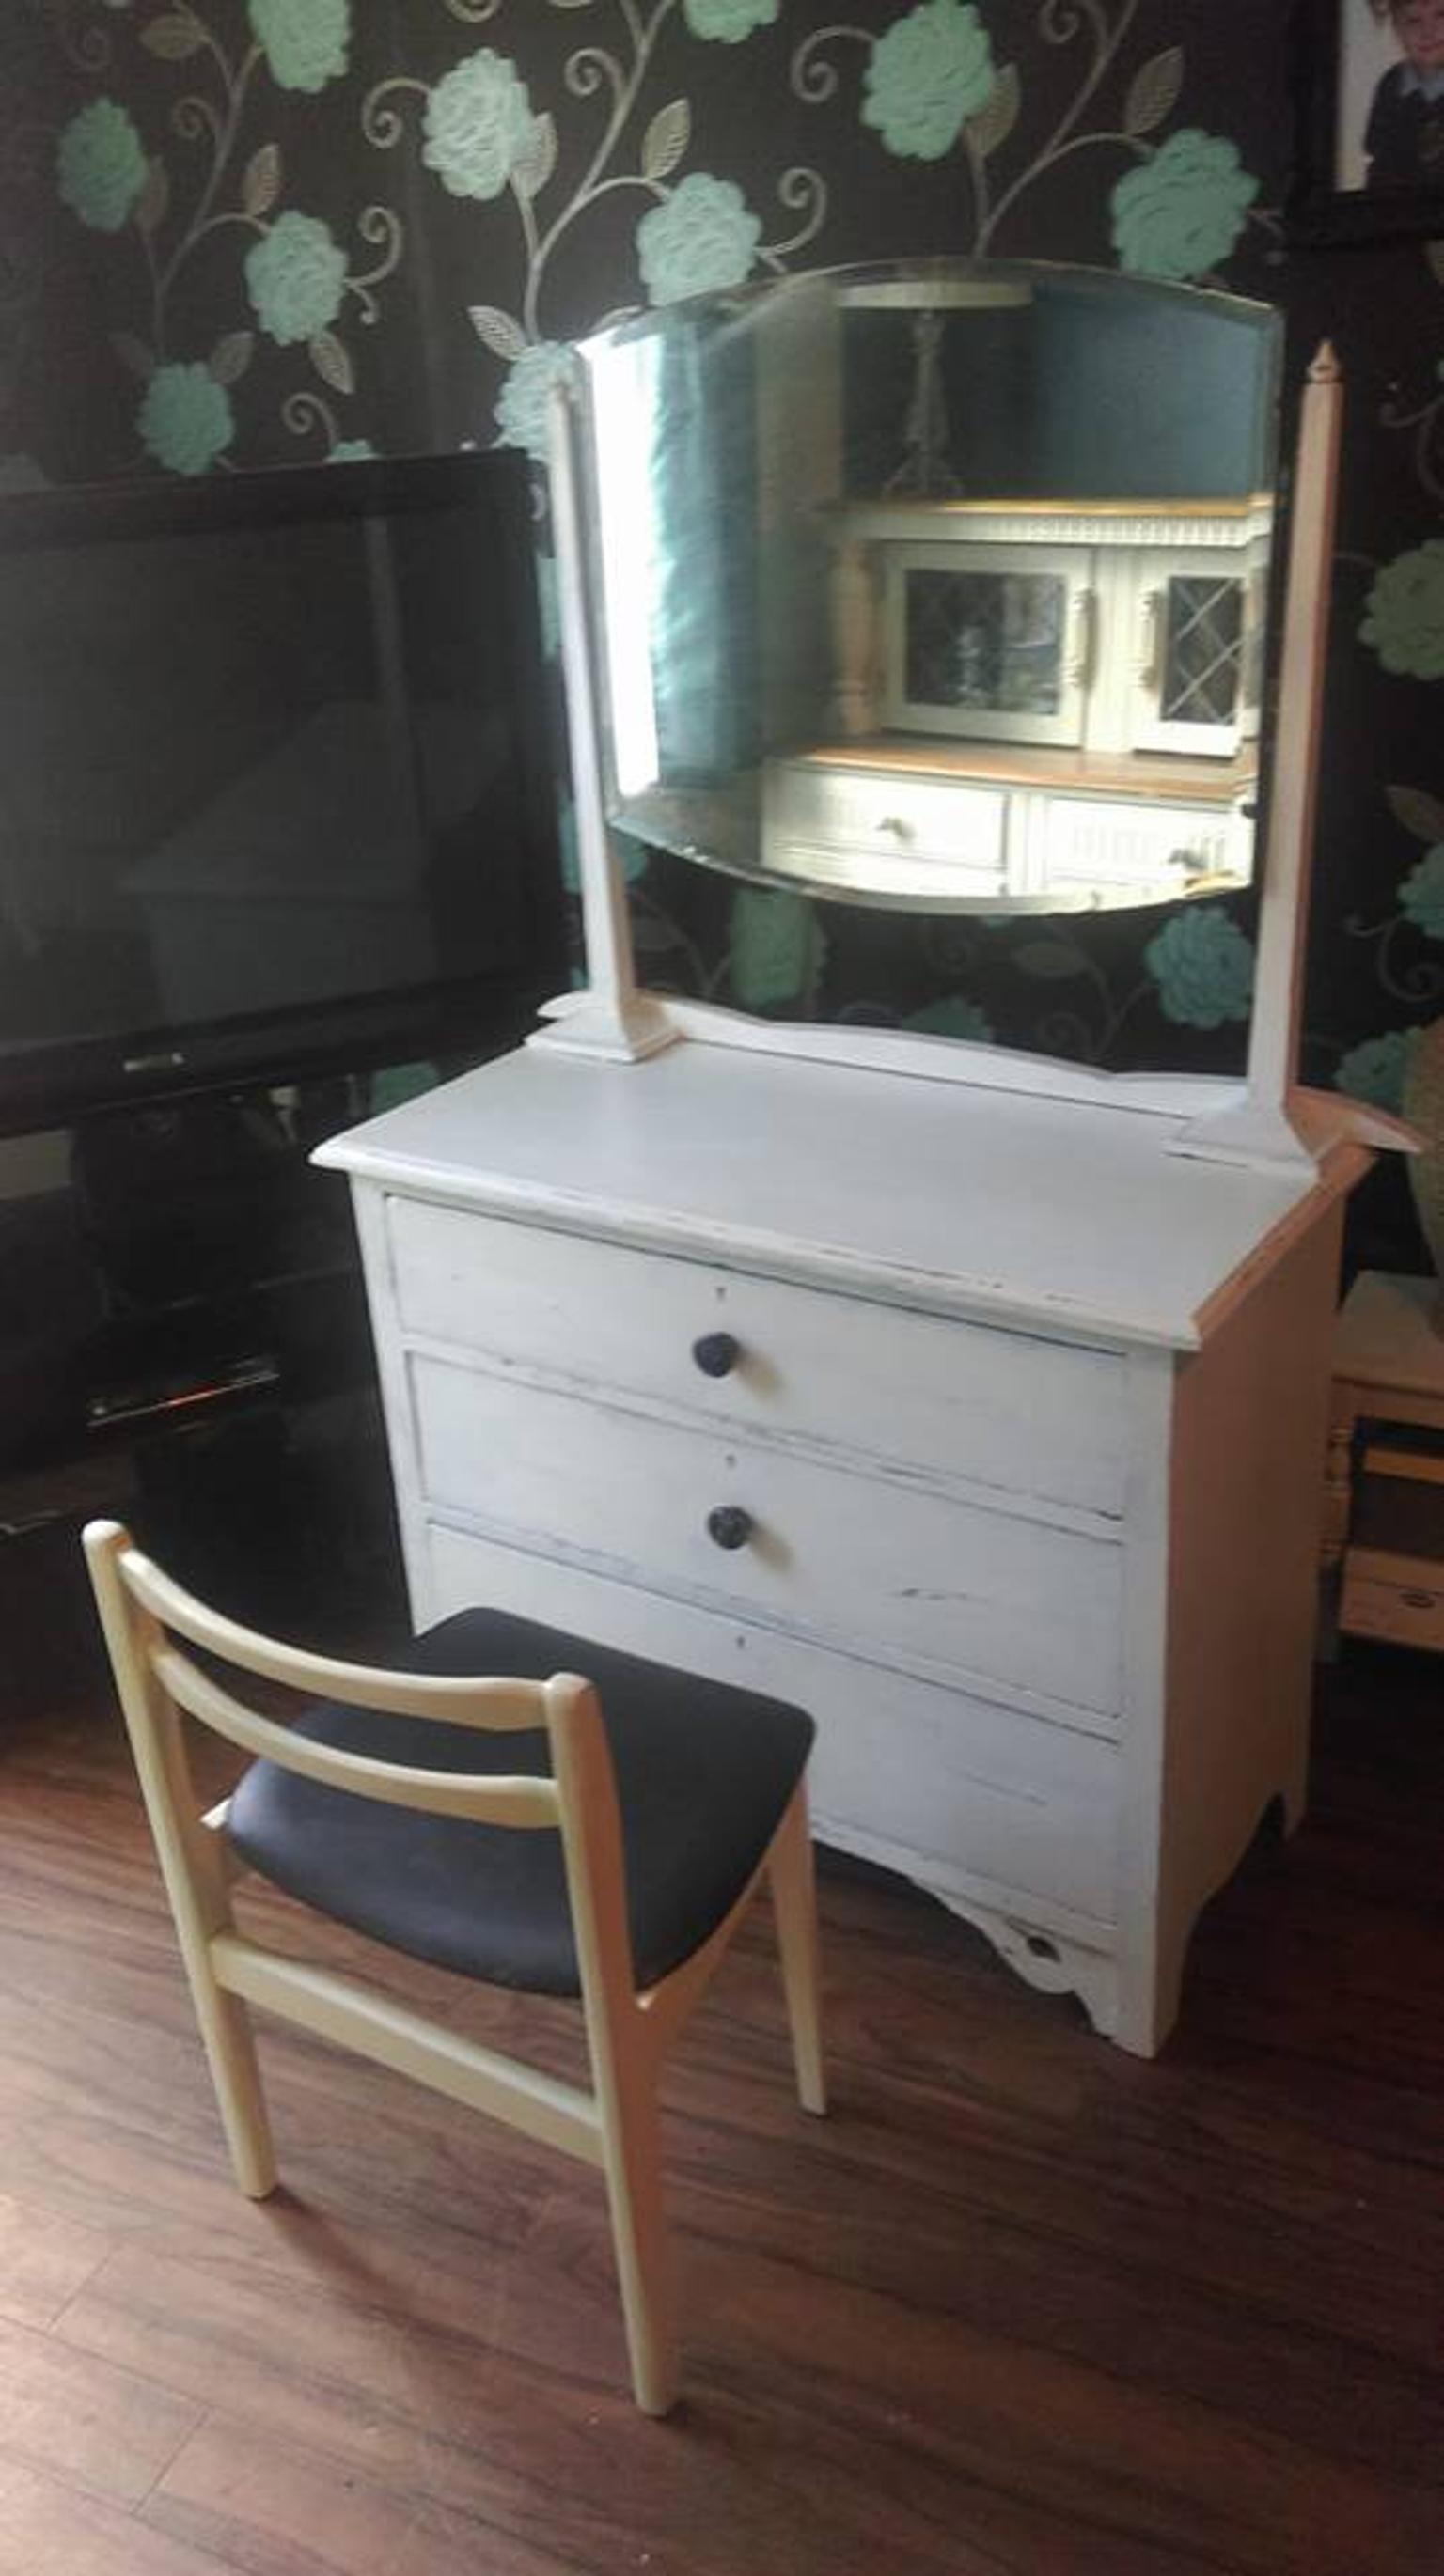 Shabby Chic Dressing Table Mirror And Chair In Sk16 Dukinfield